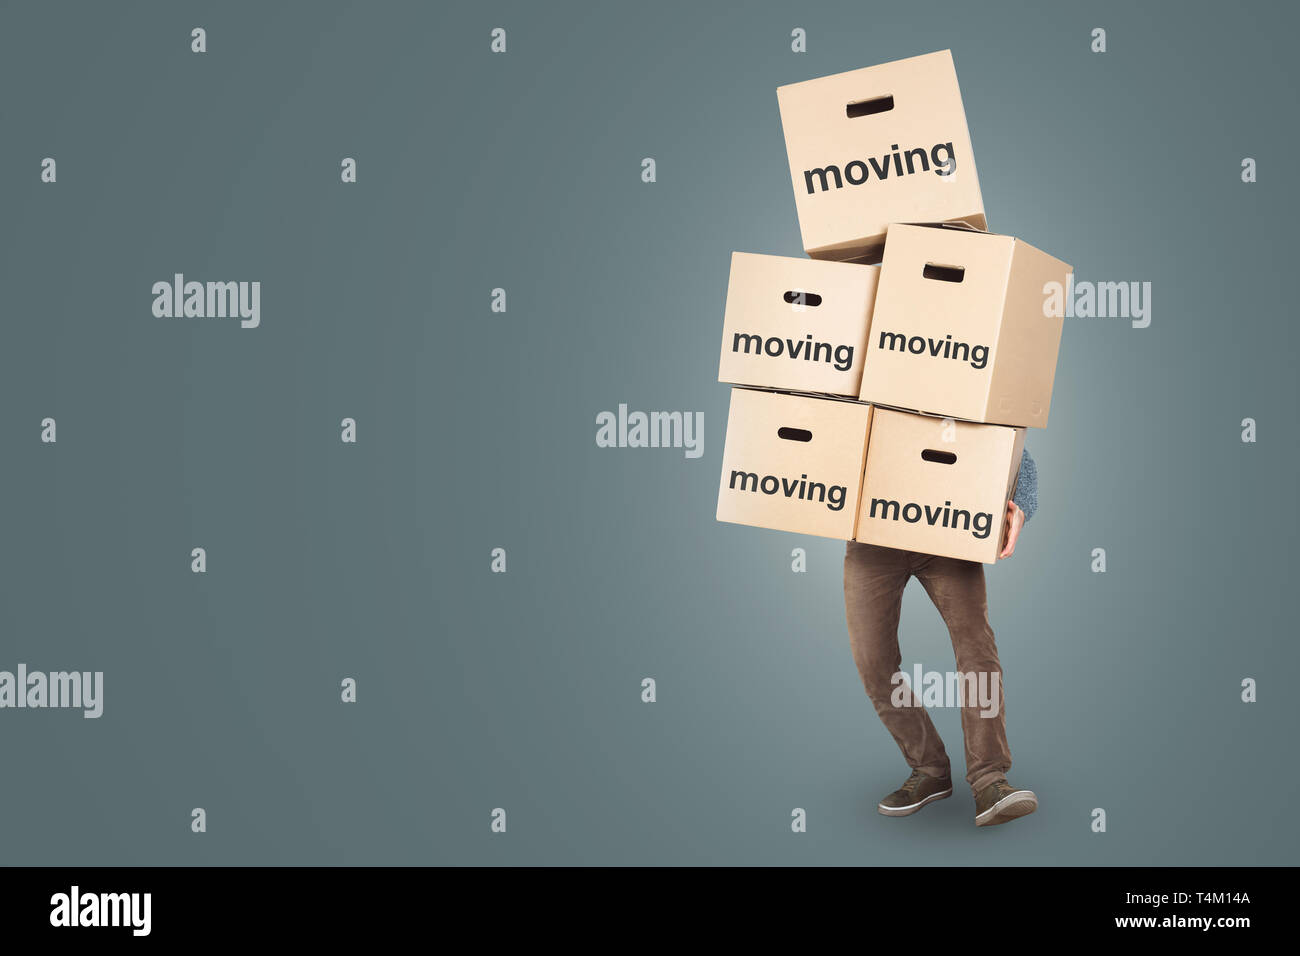 A man is carrying many moving boxes - isolated on a neutral background with copy space Stock Photo